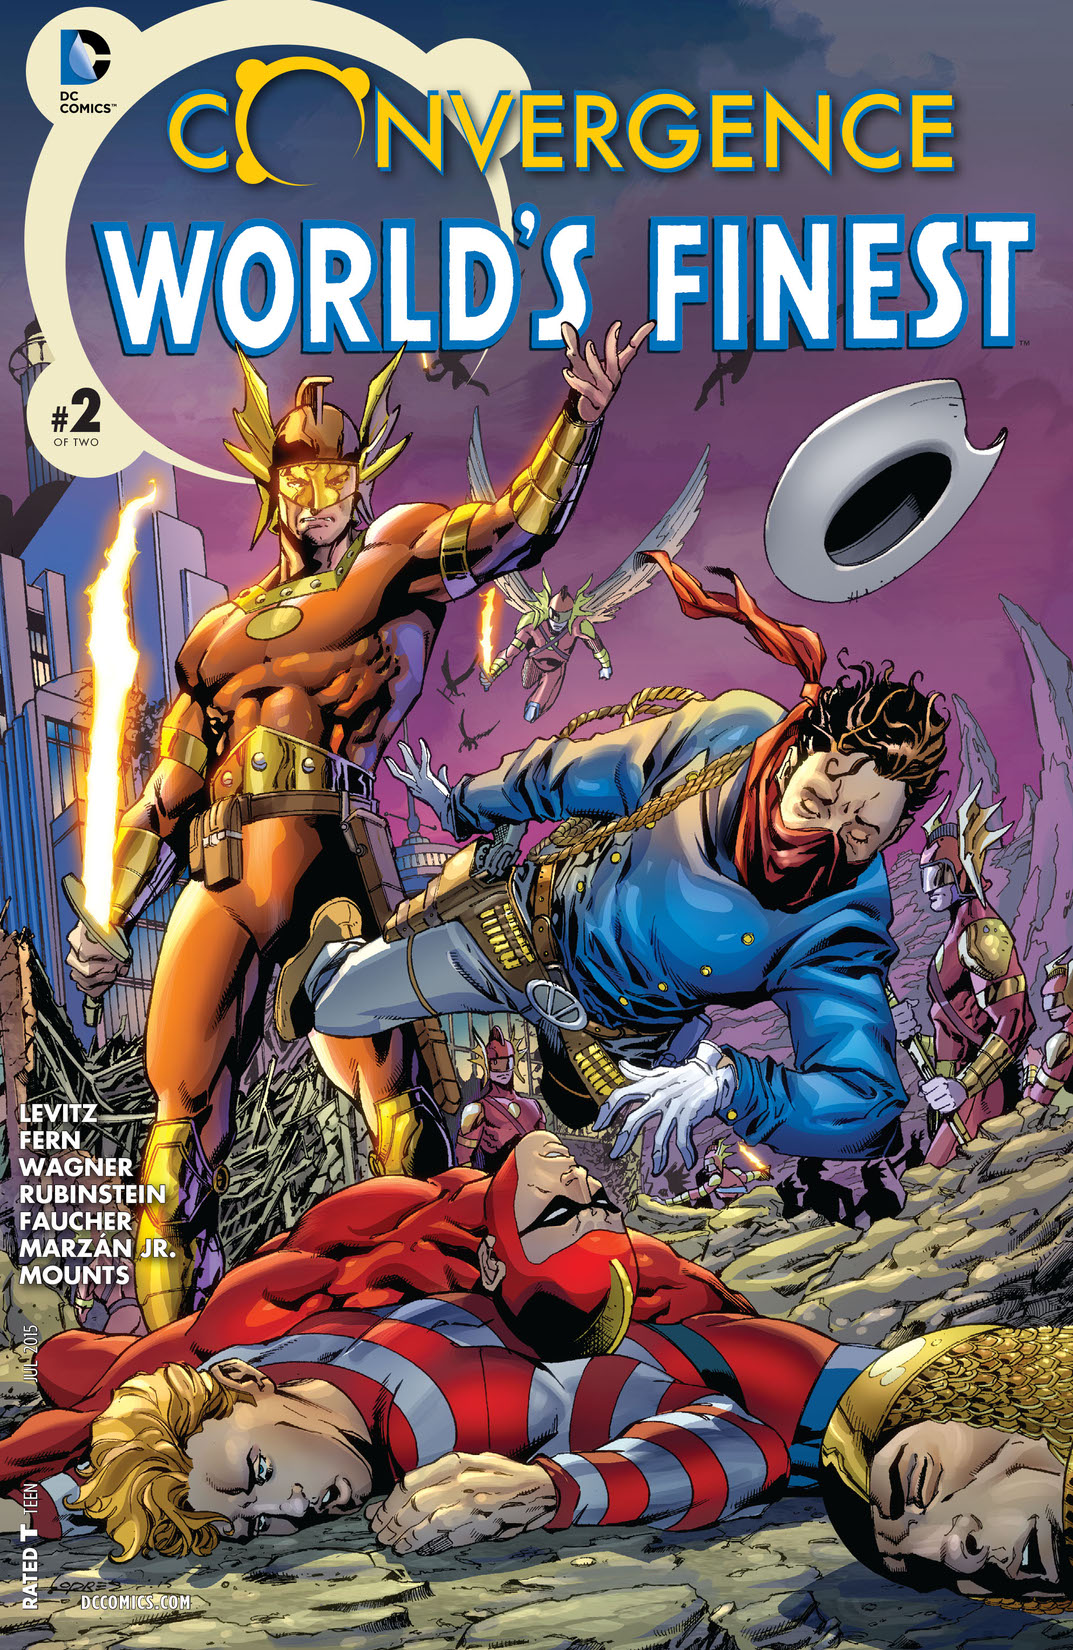 Convergence: World's Finest #2 preview images